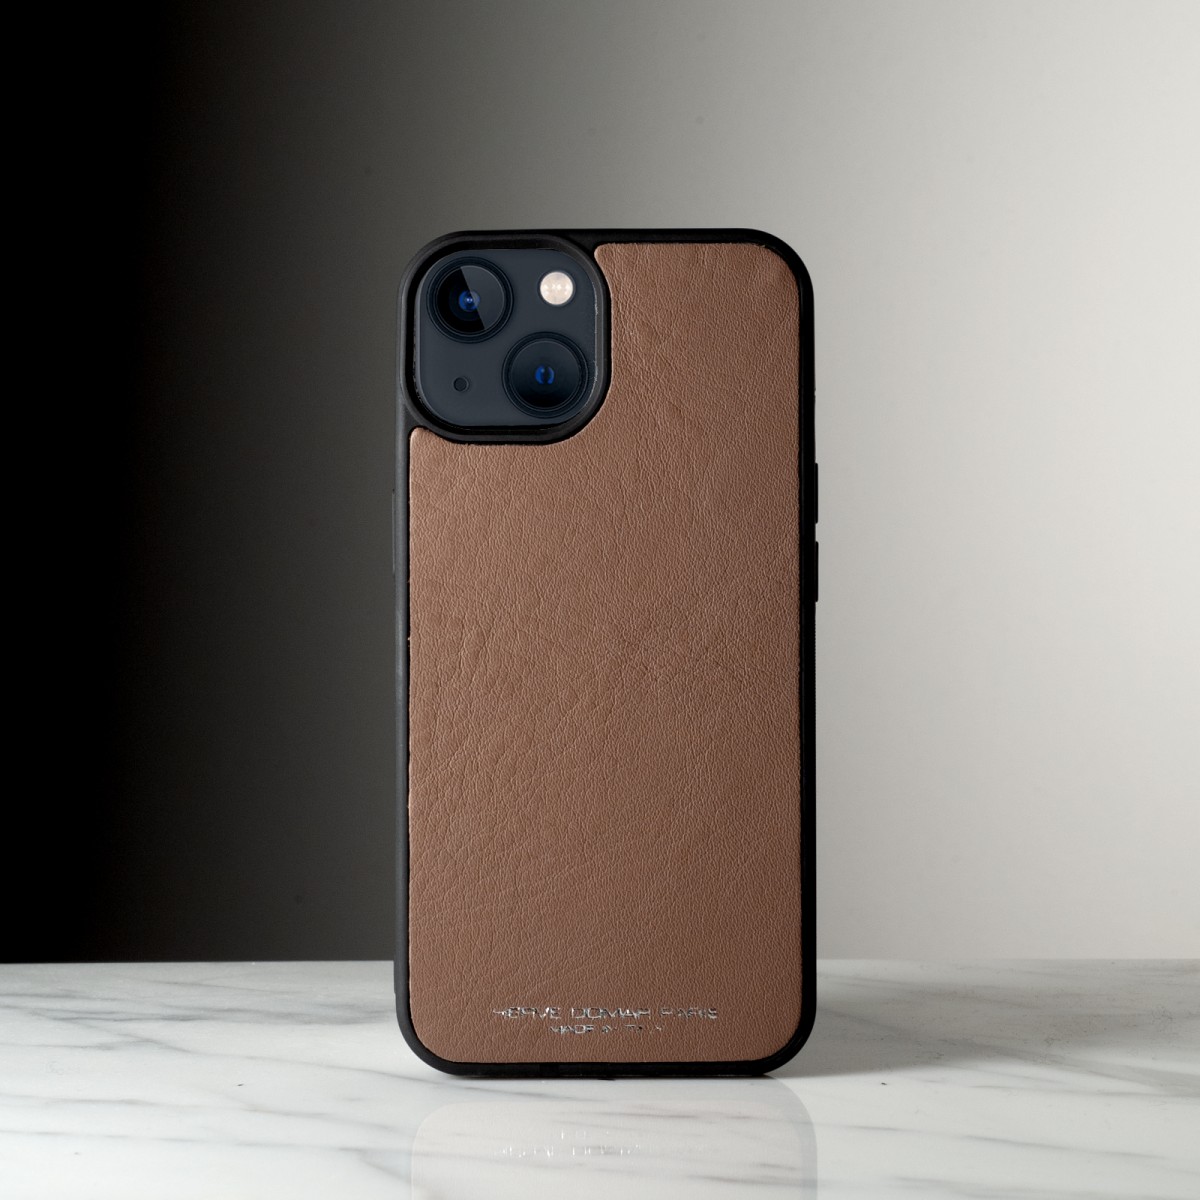 IPHONE 13 CASE - Handcrafted leather iPhone case made in Italy